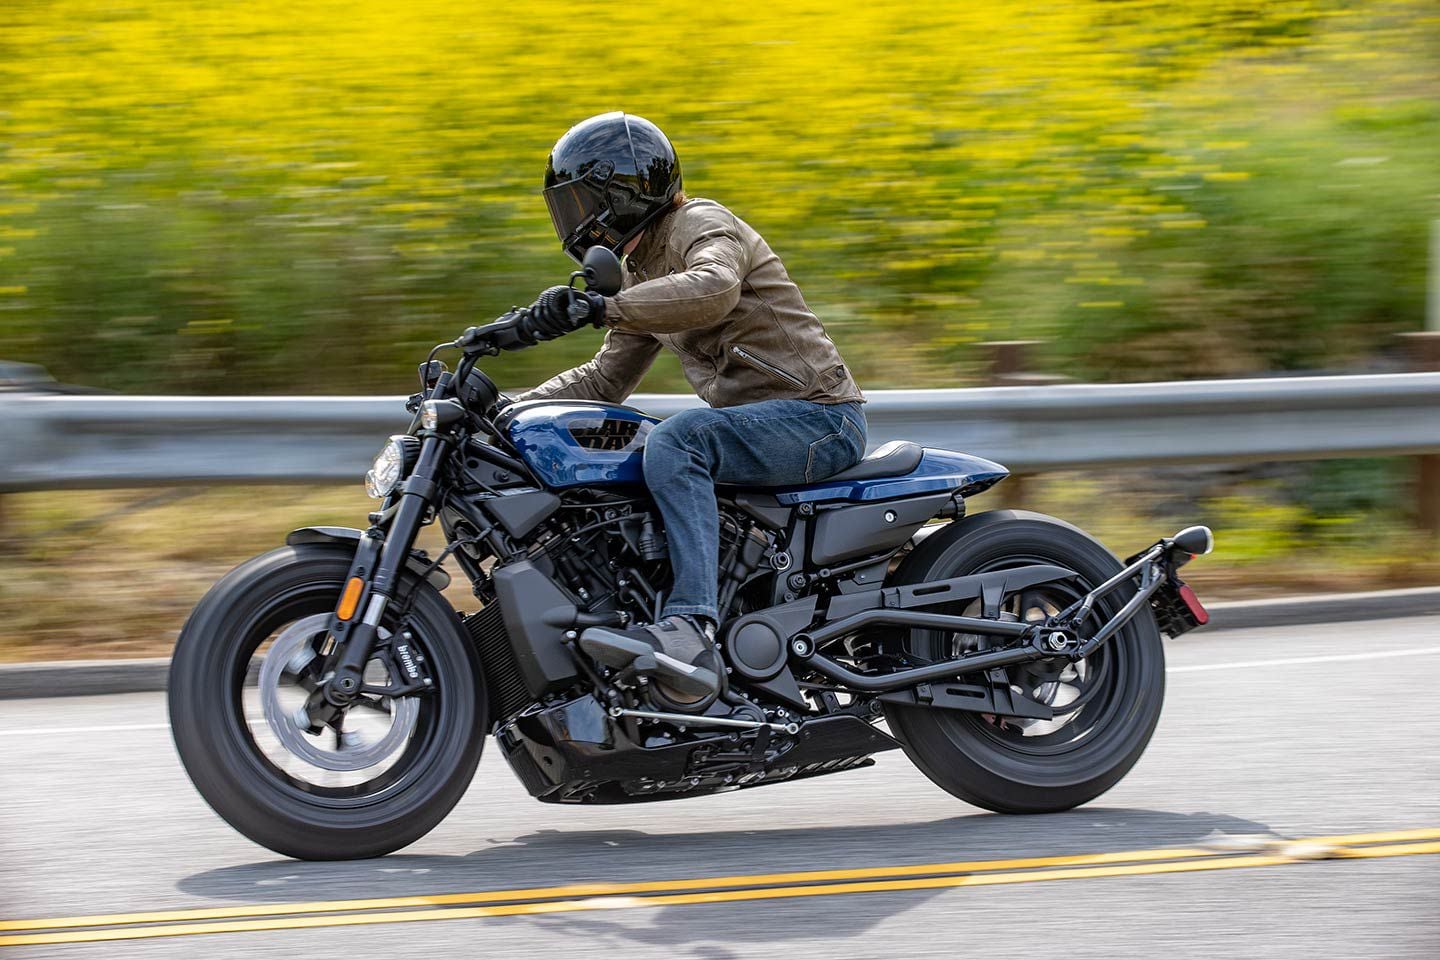 Once you get past the heavy turn-in, the Sportster S is a lot of fun on a canyon road.